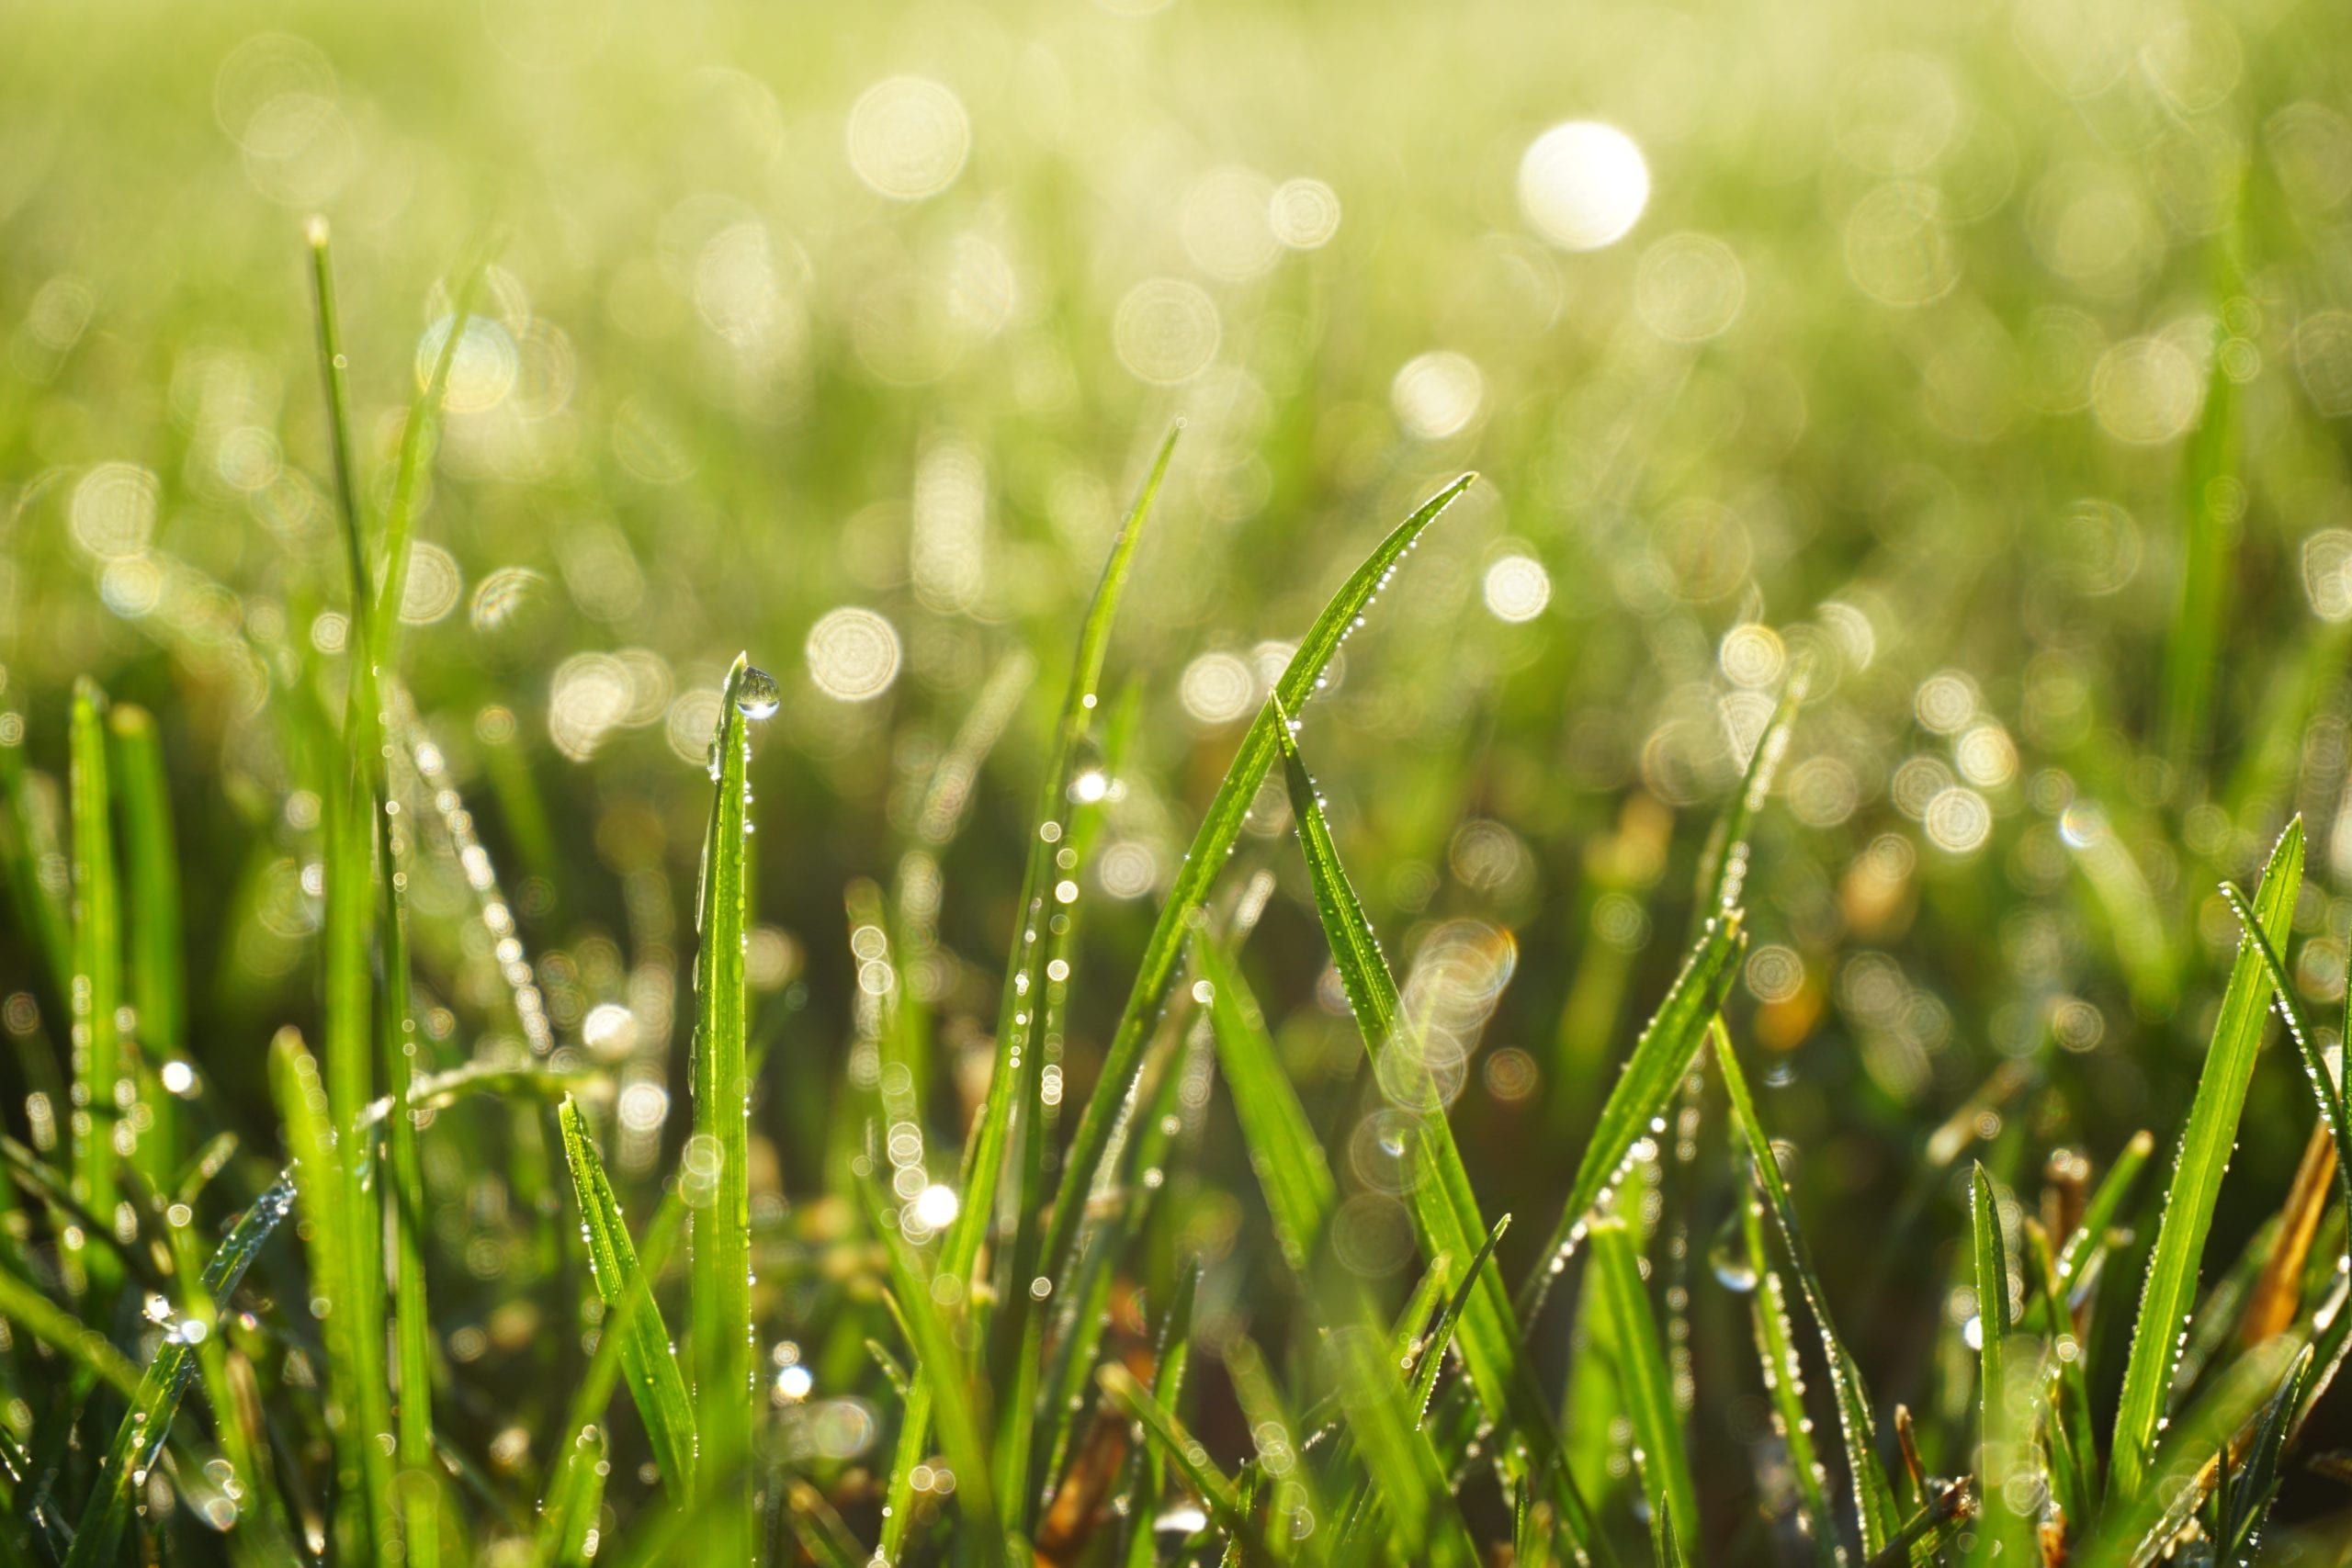 green grass with droplets on them